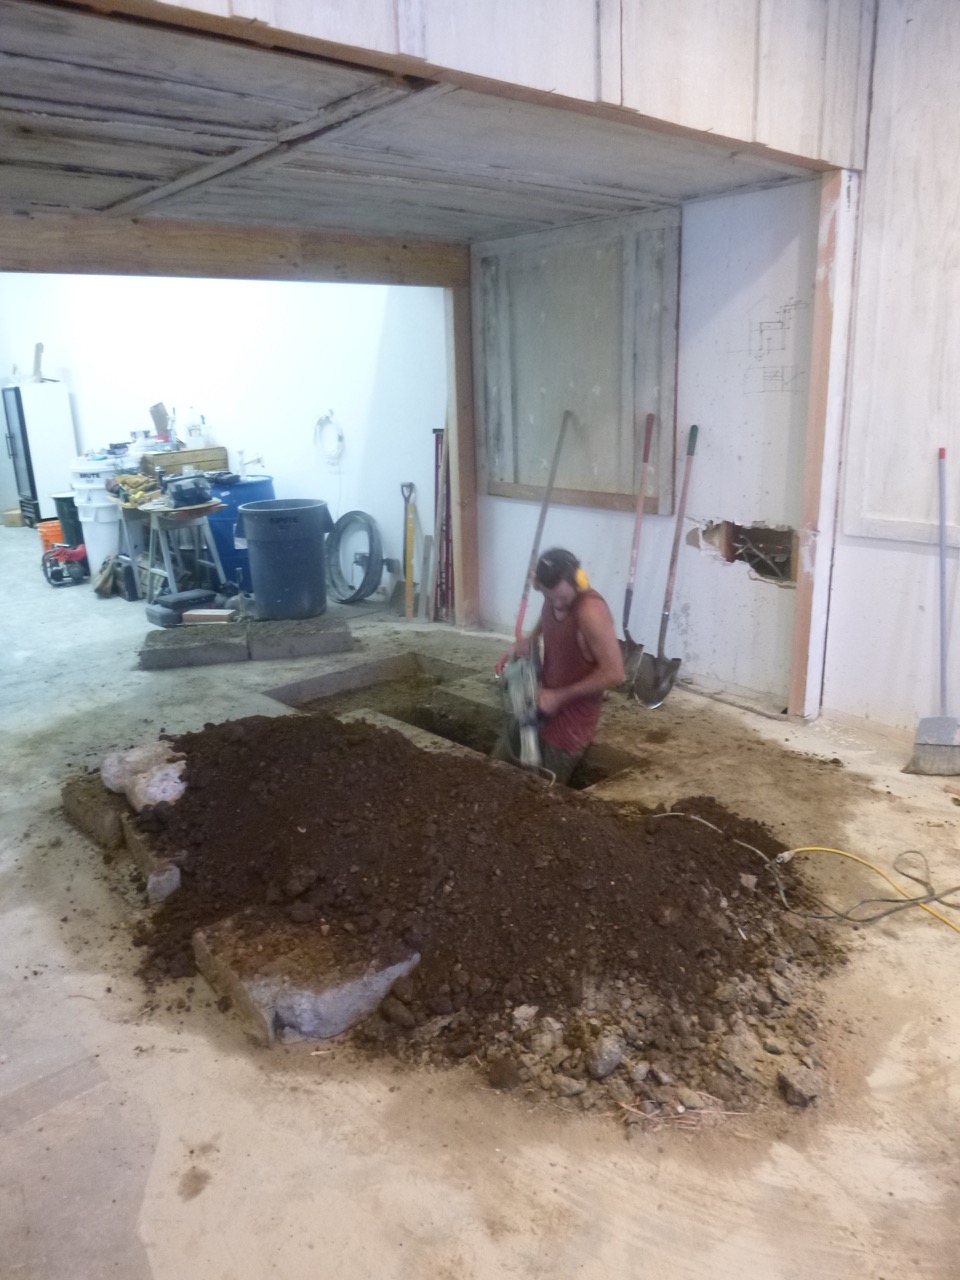  In search of the building's main drain line:&nbsp;Creative director, brewmaster, and owner Nole Cossart digging deep. Note the salvaged wall panels from discarded furniture storage units. 